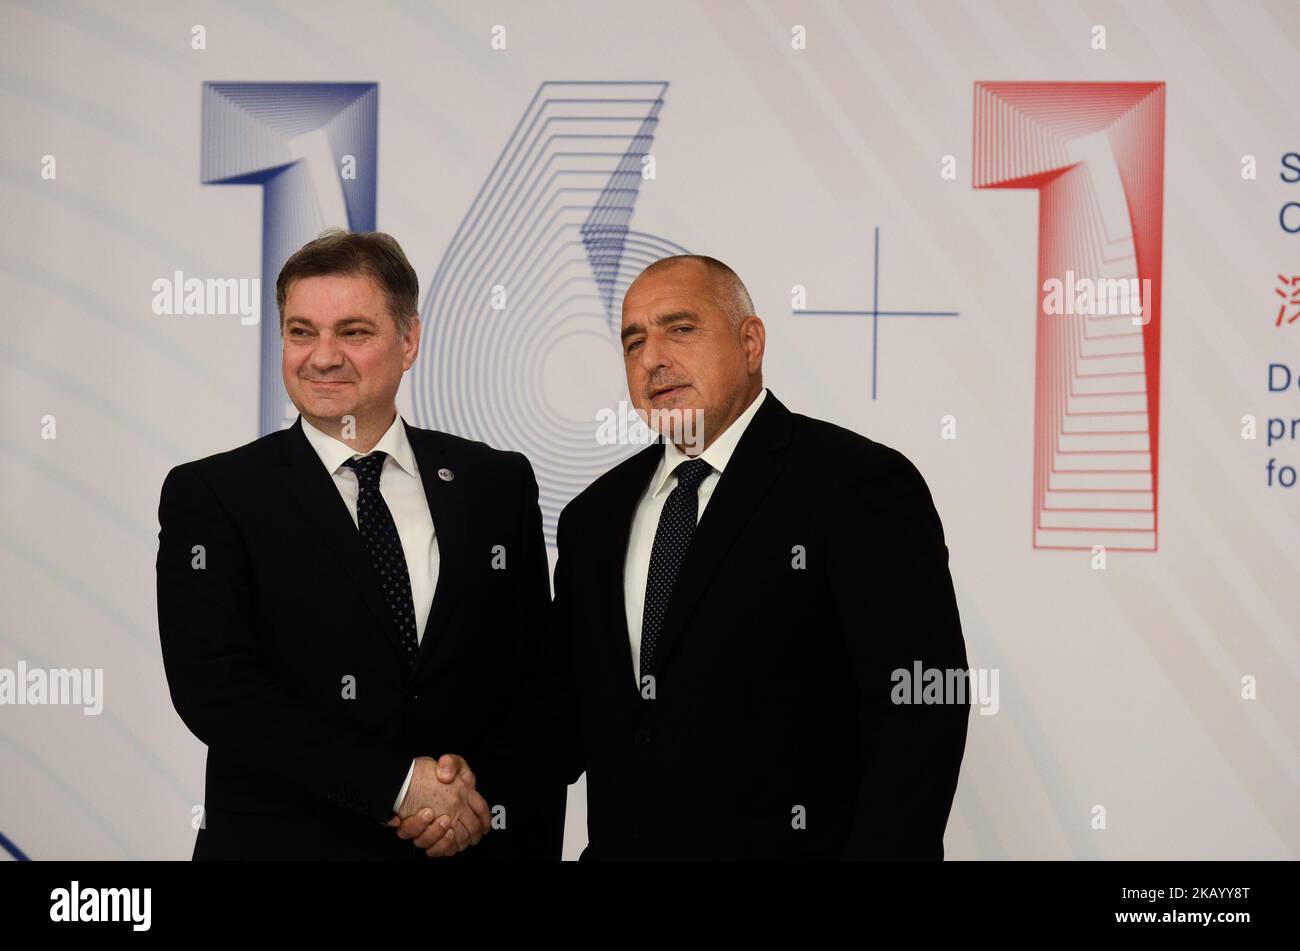 The Prime Minister of Bosnia and Herzegovina, Denis Zvizdic handshake with the Bulgarian Prime Minister Boyko Borisov, during The 7th CEEC and Summit of Heads of Government of Central and East European Economic Co-operation hold in the National Palace of Culture in Sofia, Bulgaria on July 07, 2018 (Photo by Hristo Rusev/NurPhoto) Stock Photo